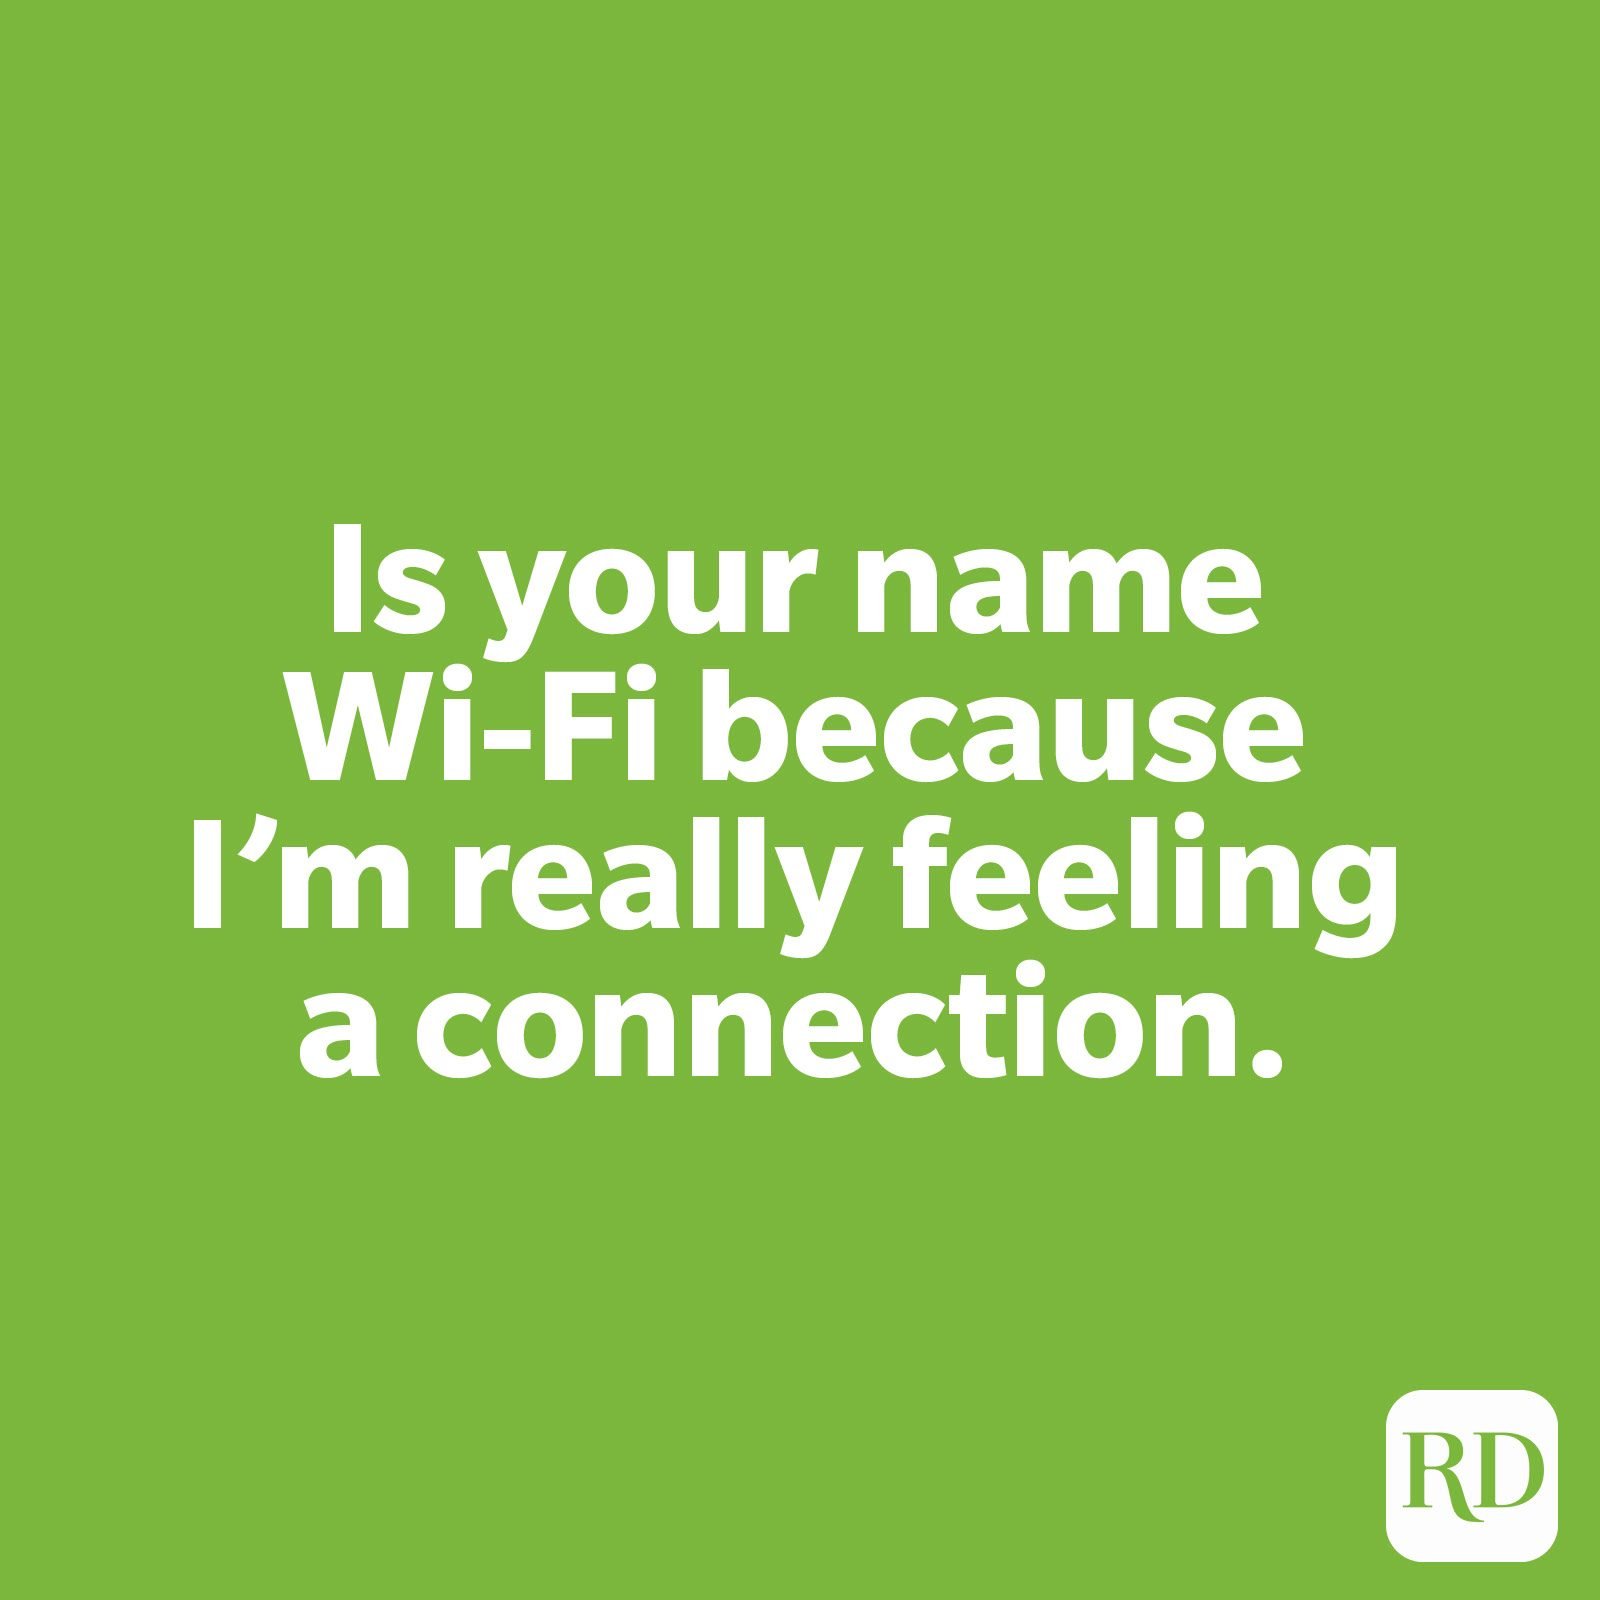 Is your name Wi-Fi because I’m really feeling a connection.